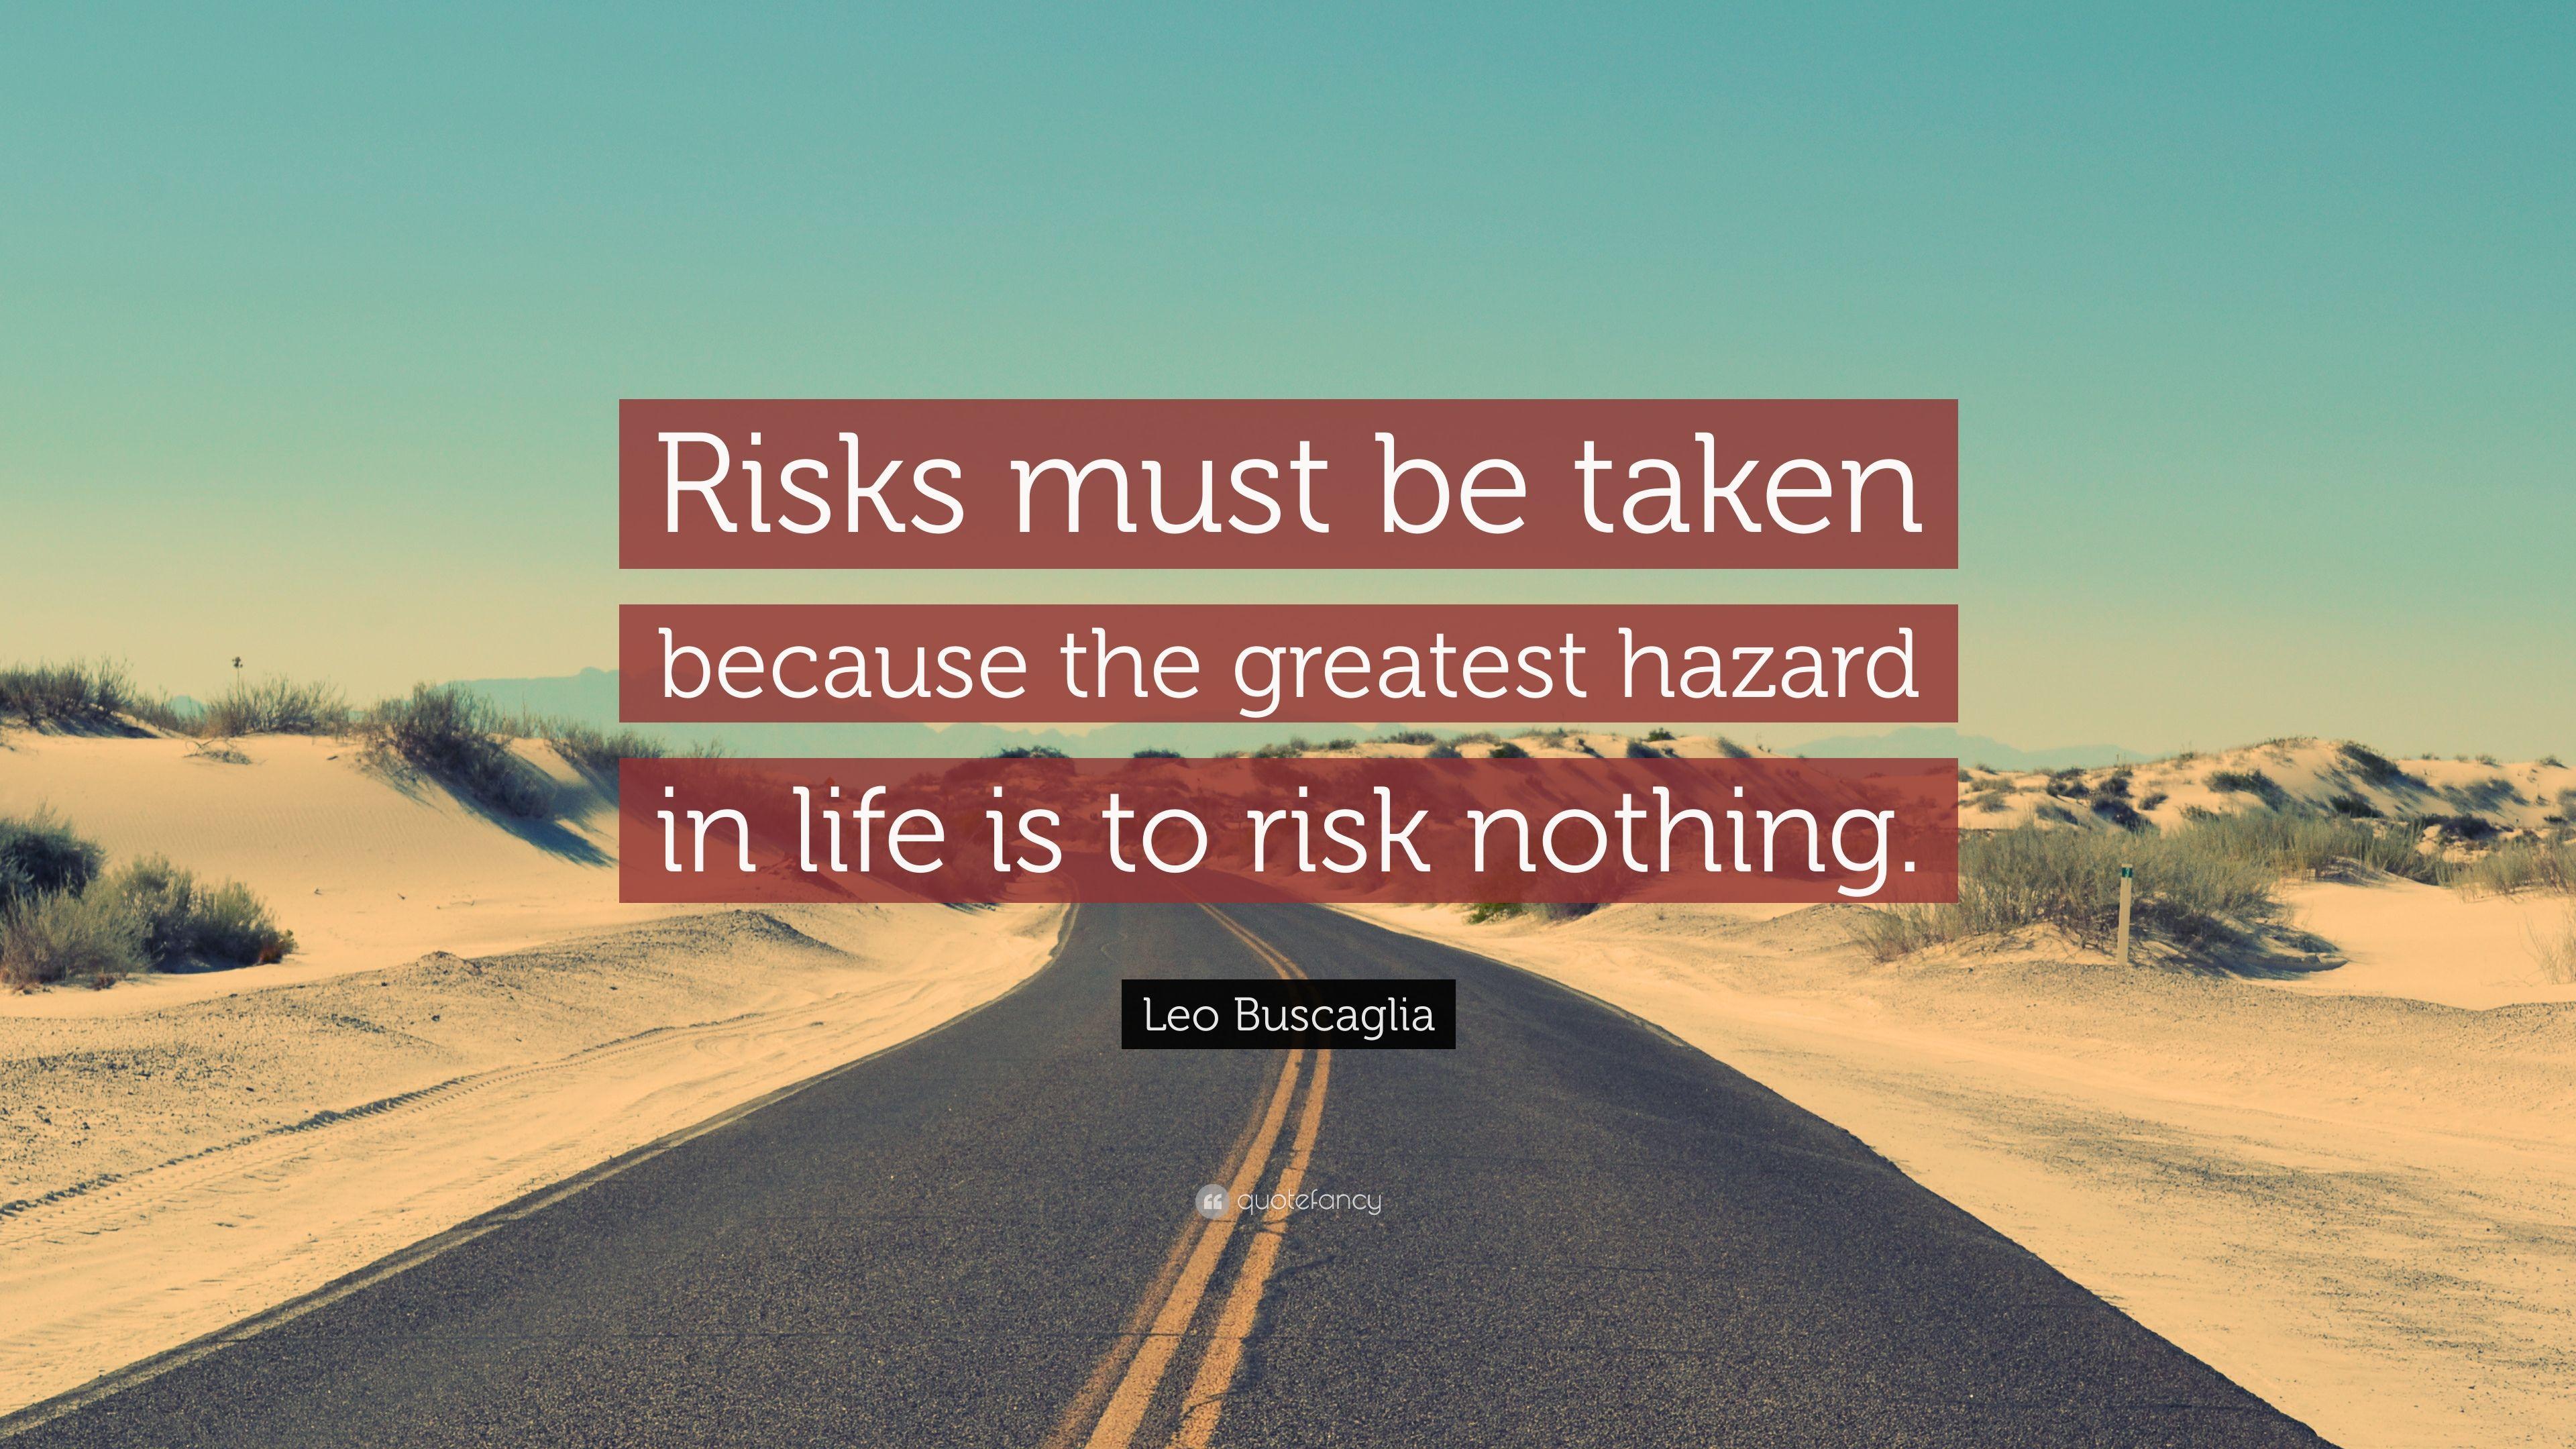 Leo Buscaglia Quote: “Risks must be taken because the greatest